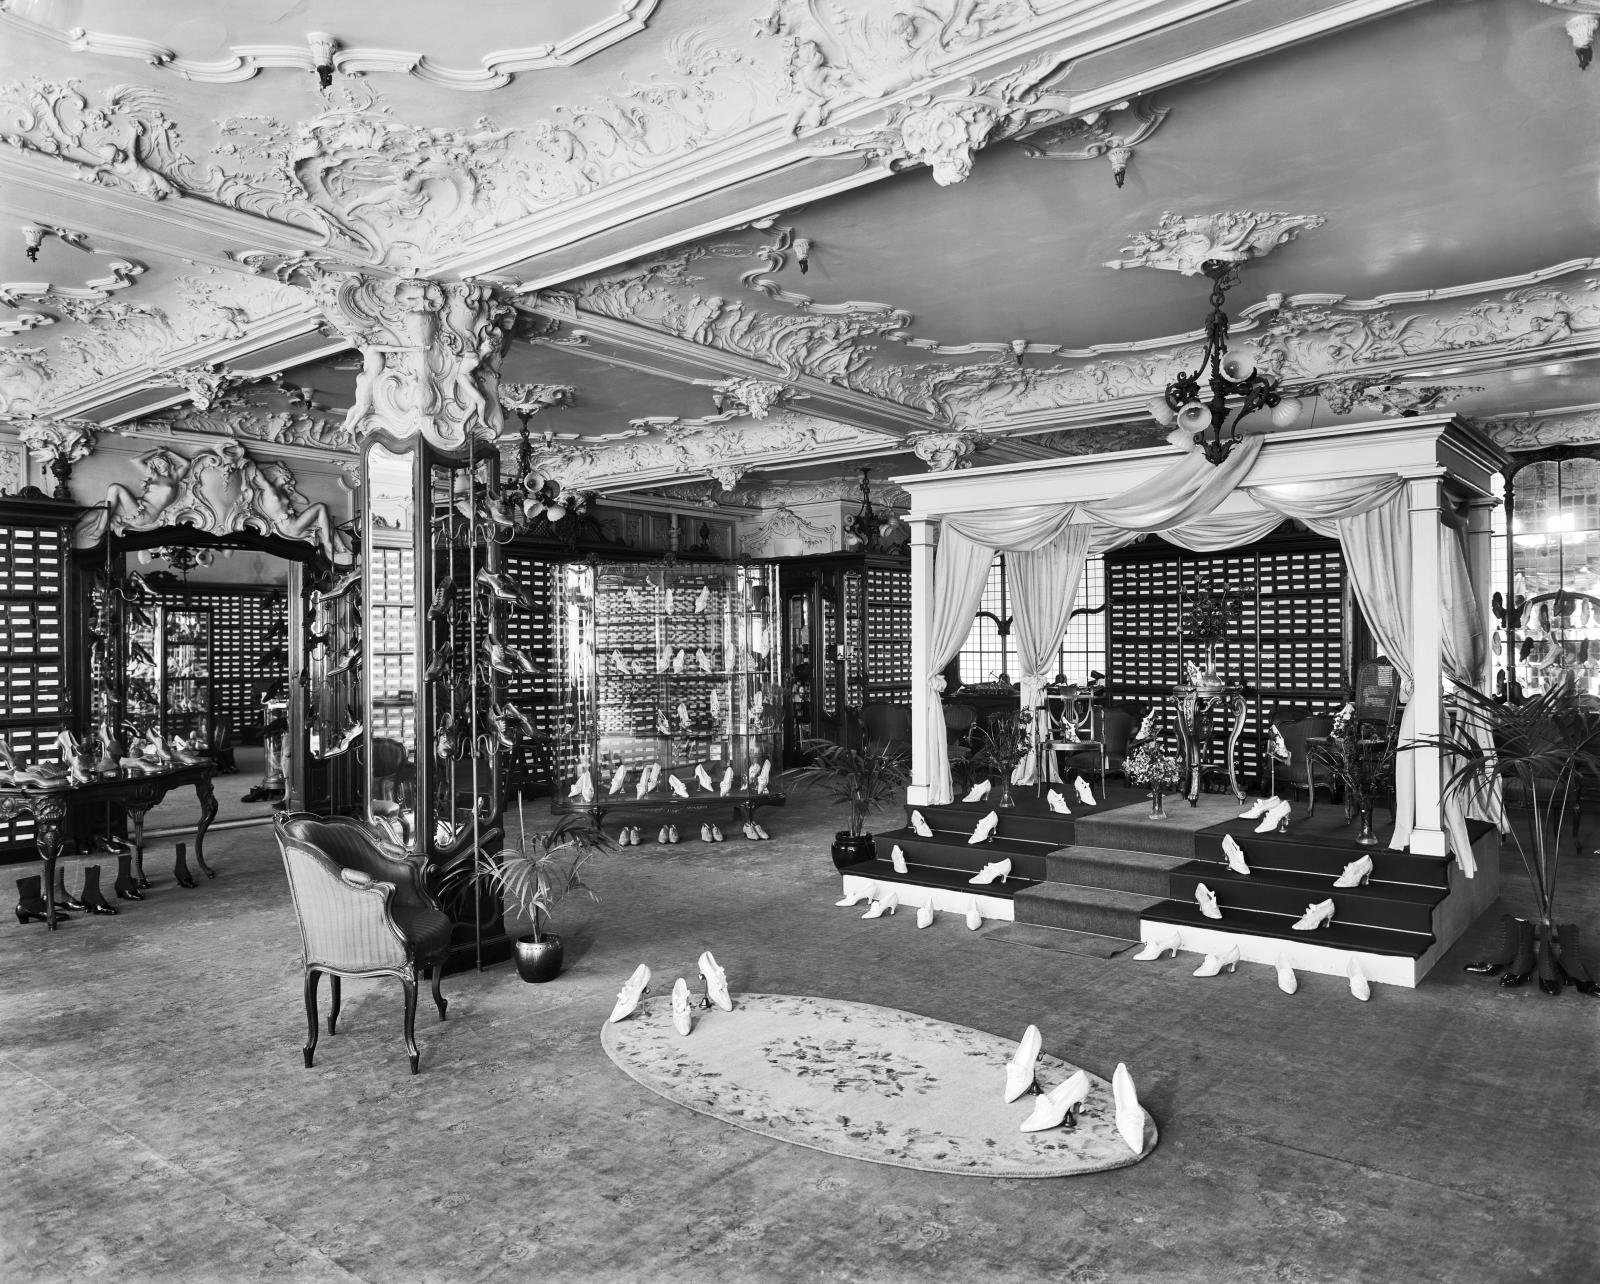 Harrods Shoe Department, decorated by Frederick Sage & Co. Ltd, in 1919